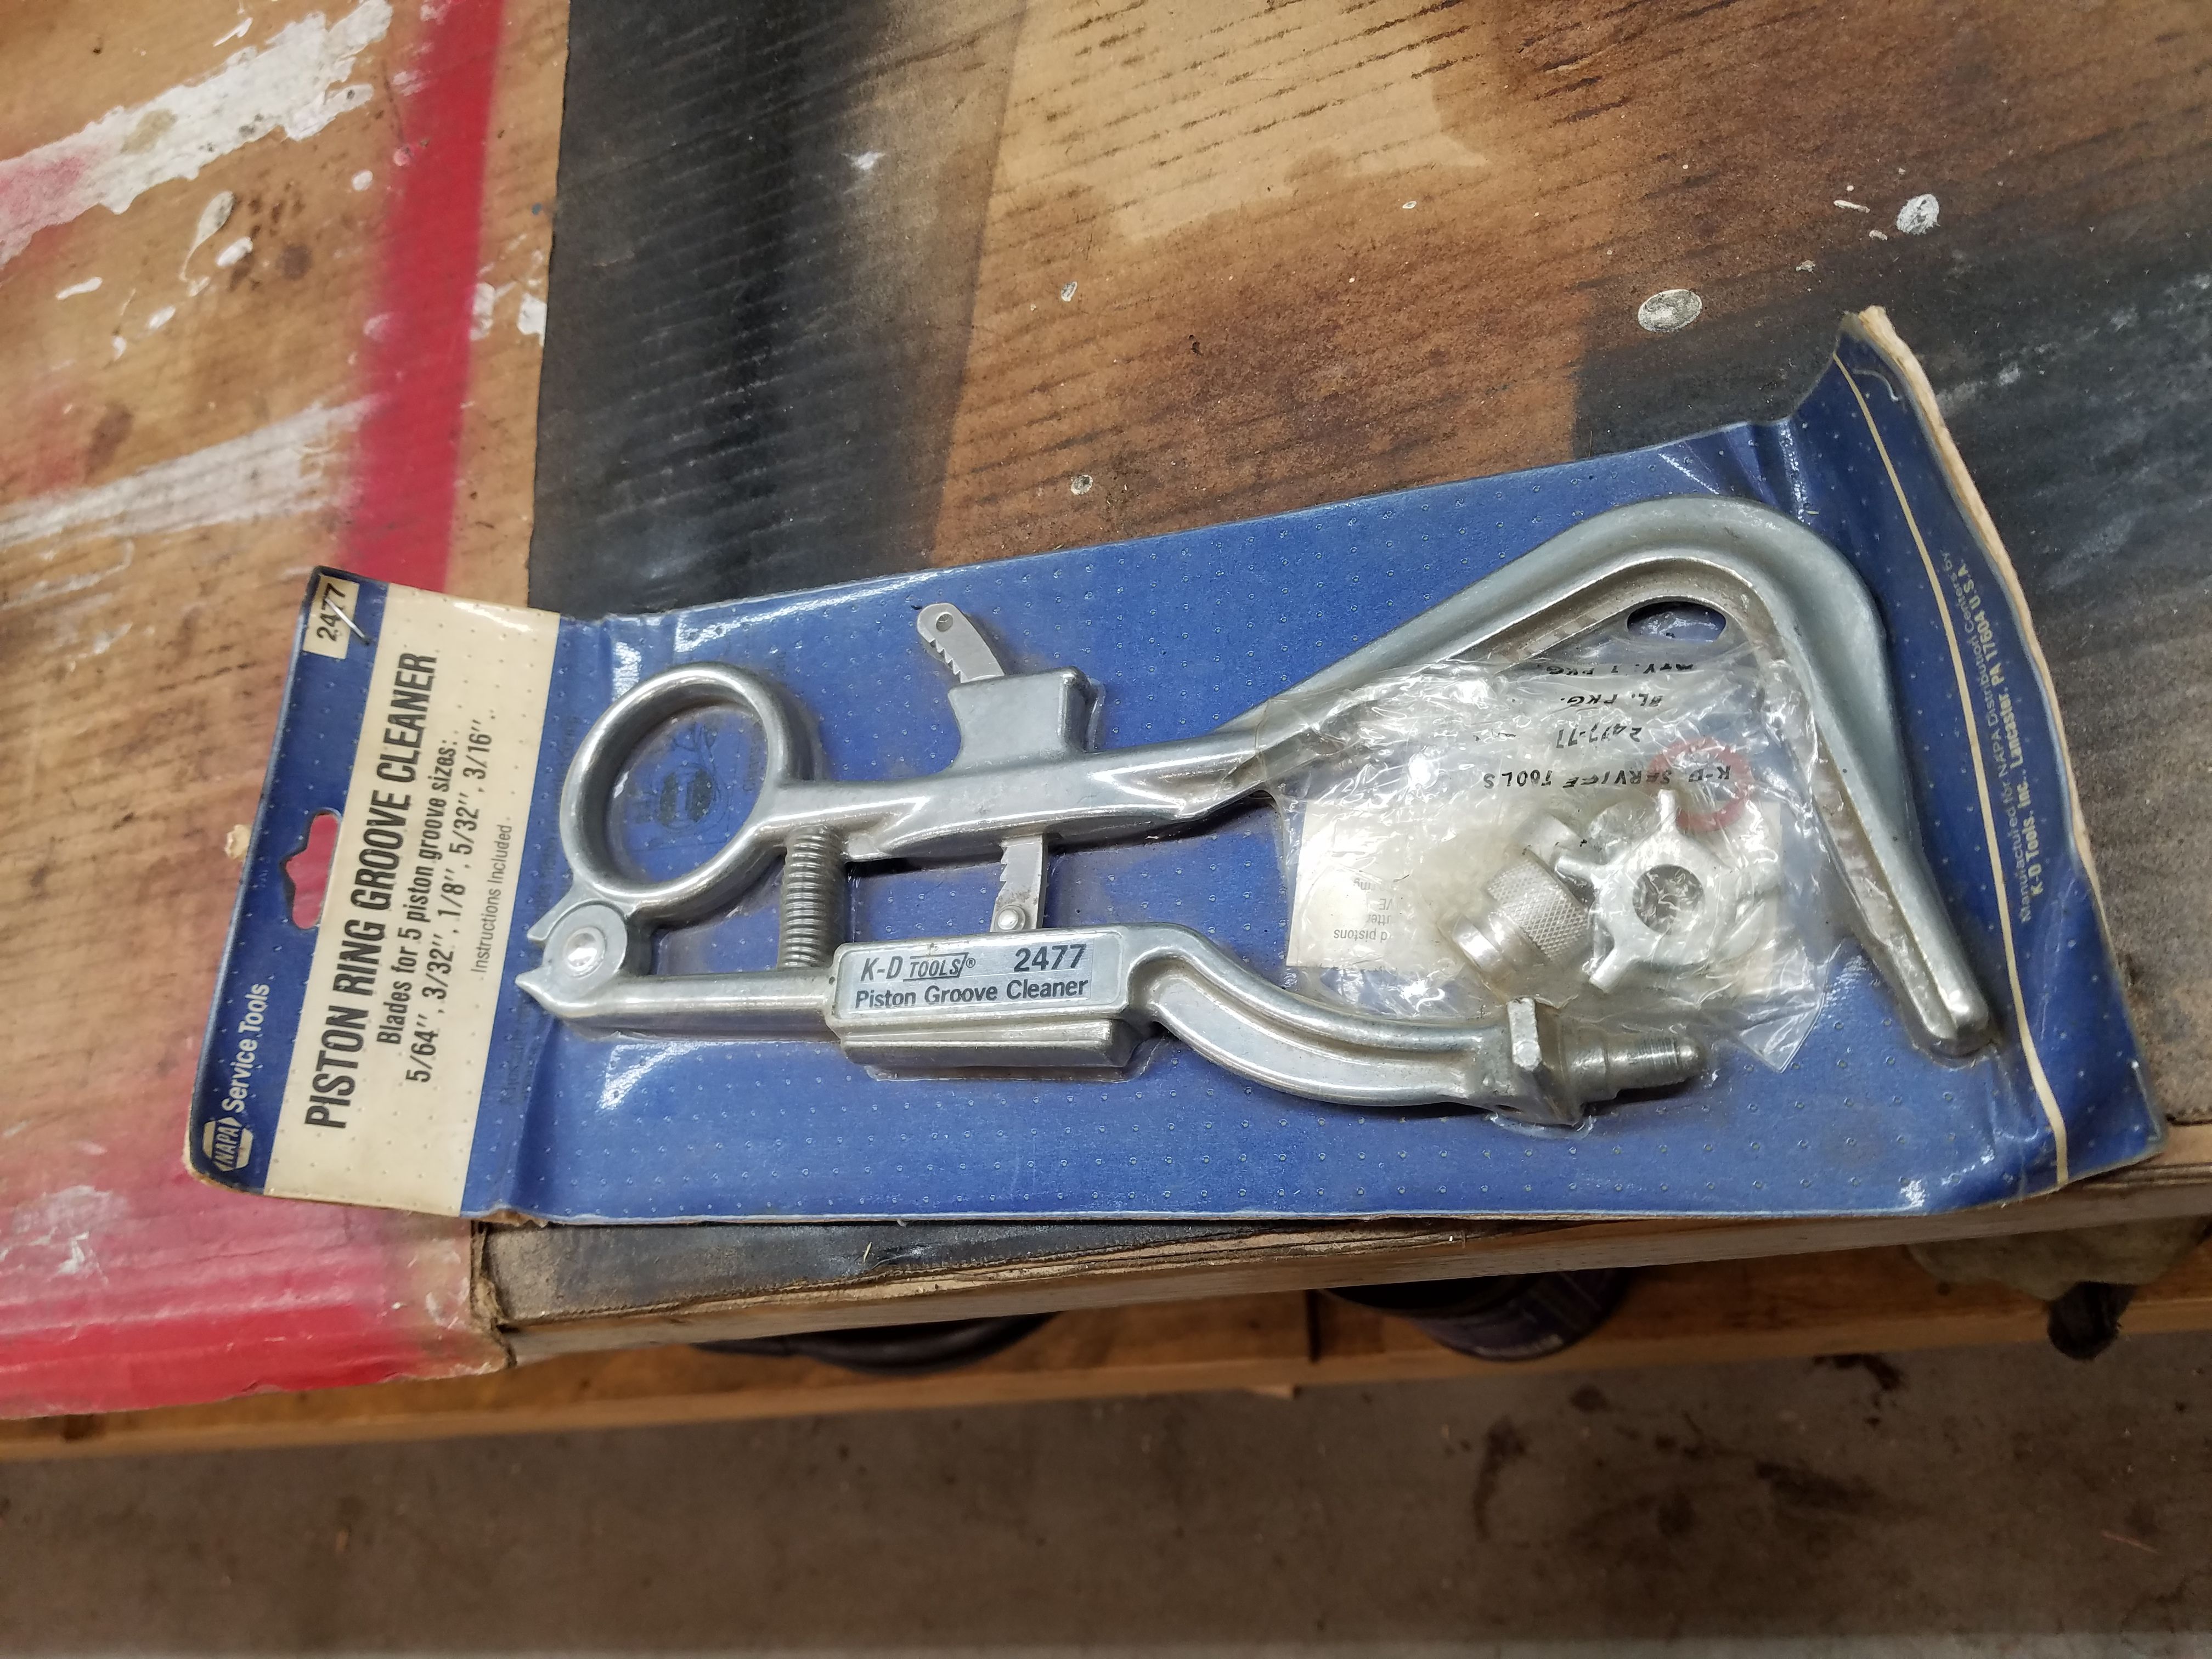 NAPA (KD) Piston Ring Groove Cleaner for Sale in Greencastle, PA